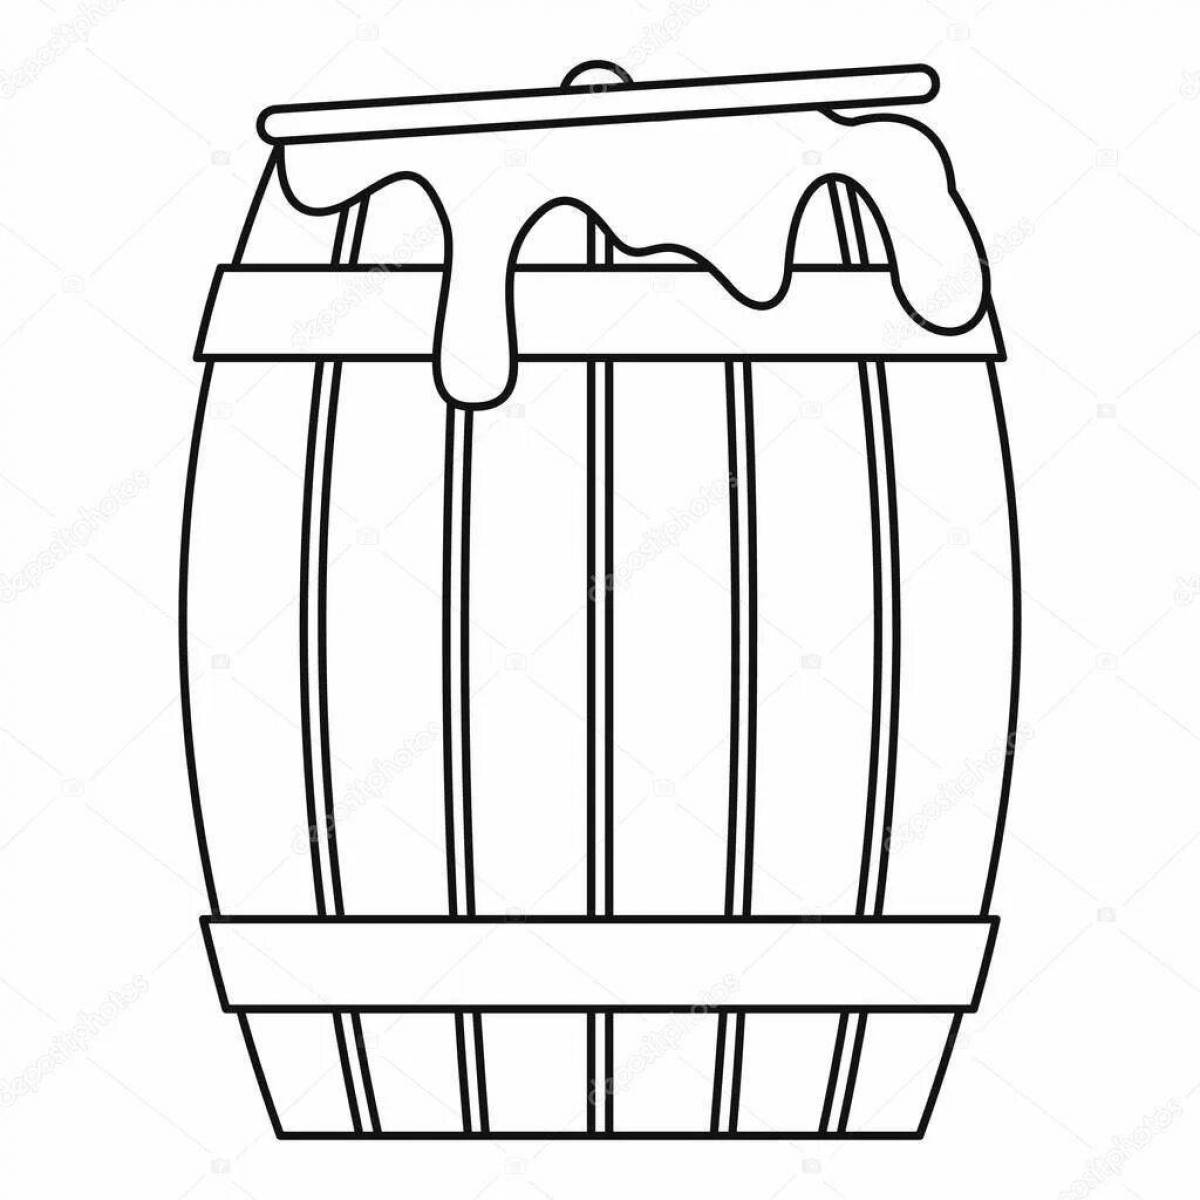 Glowing barrel of honey coloring page